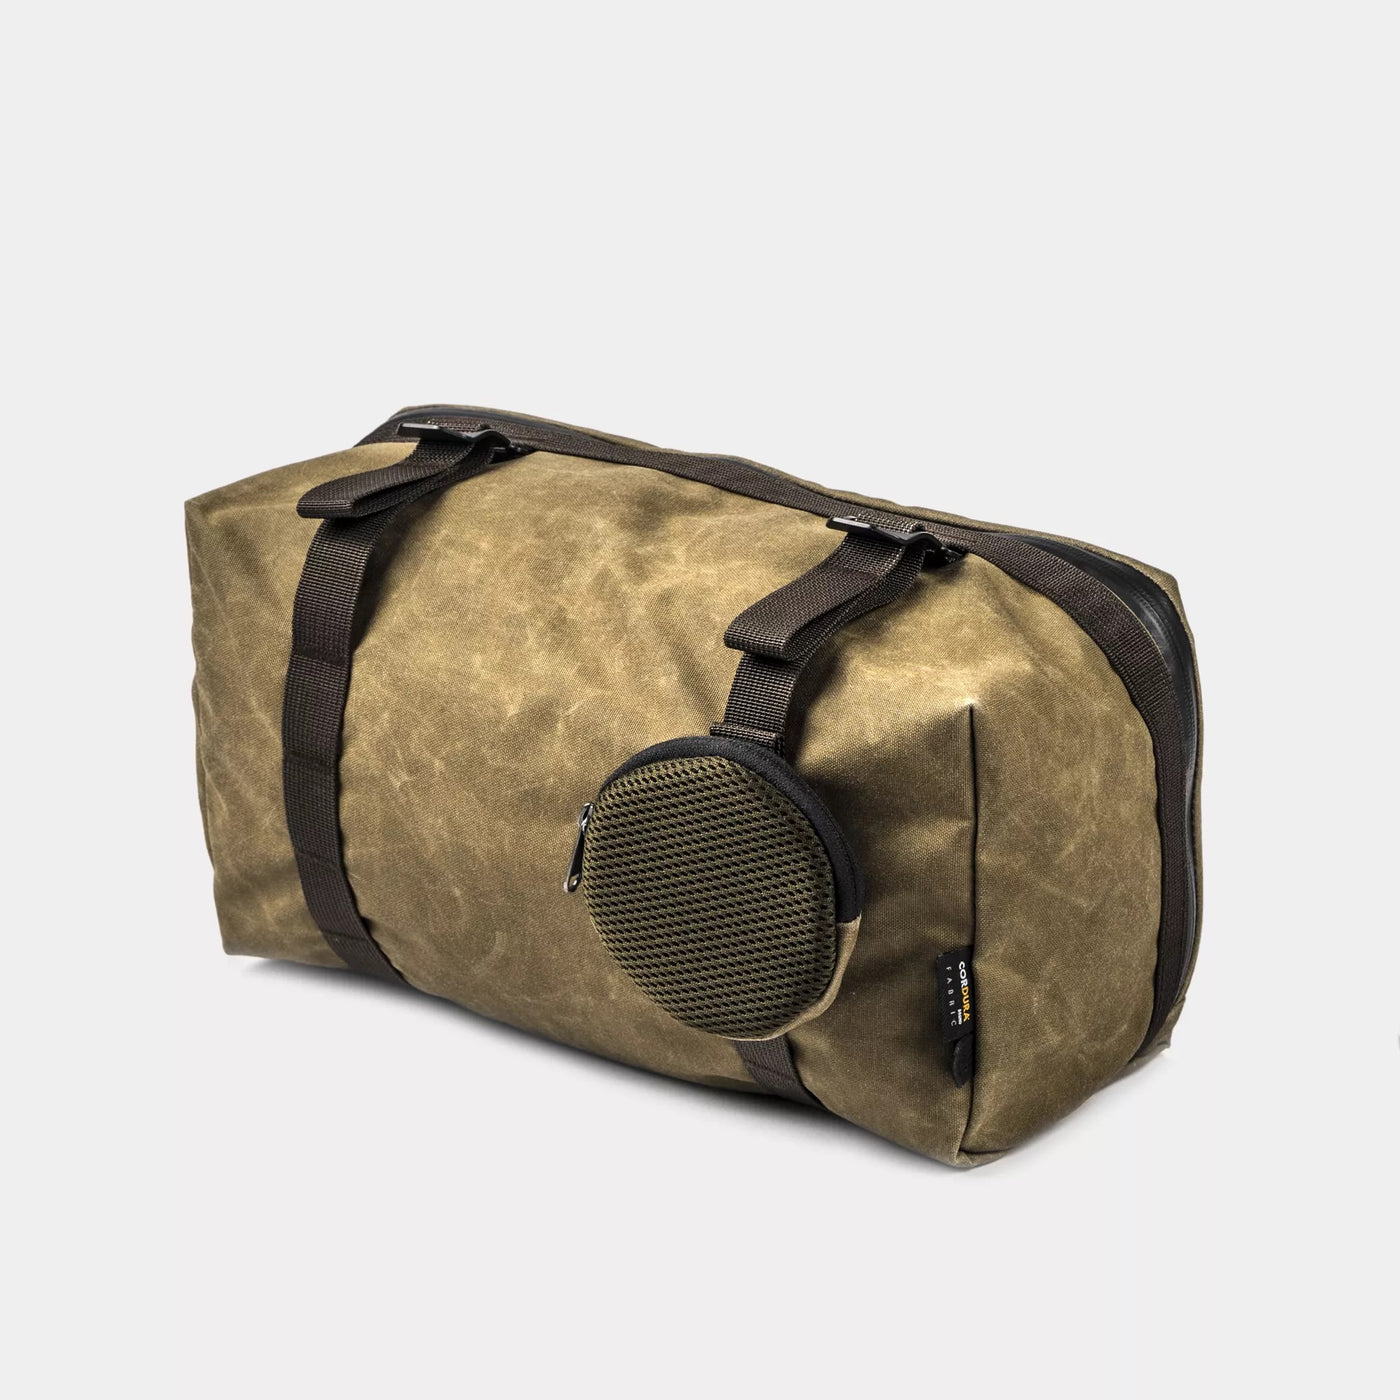 Add-on Coin Pouch Module